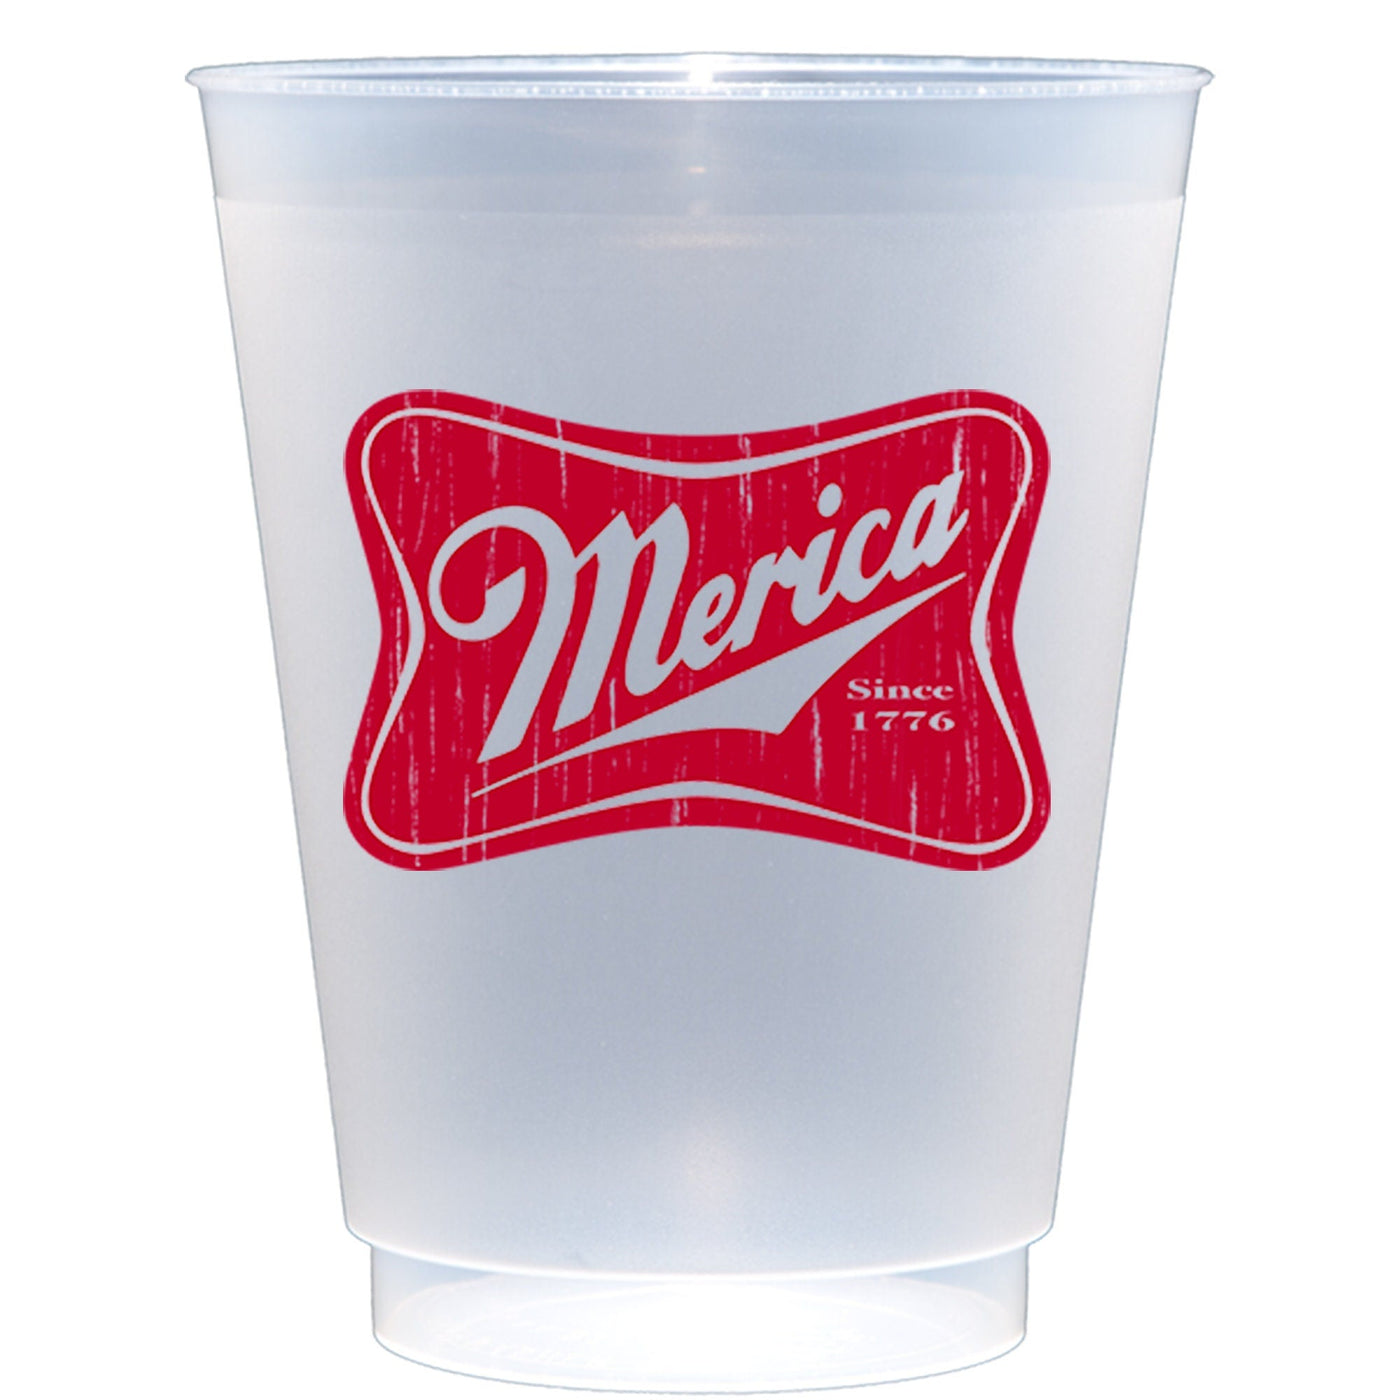 Merica 4th of July Memorial Day Patriotic Party Frost Flex Shatterproof Cups - JJ's Party House